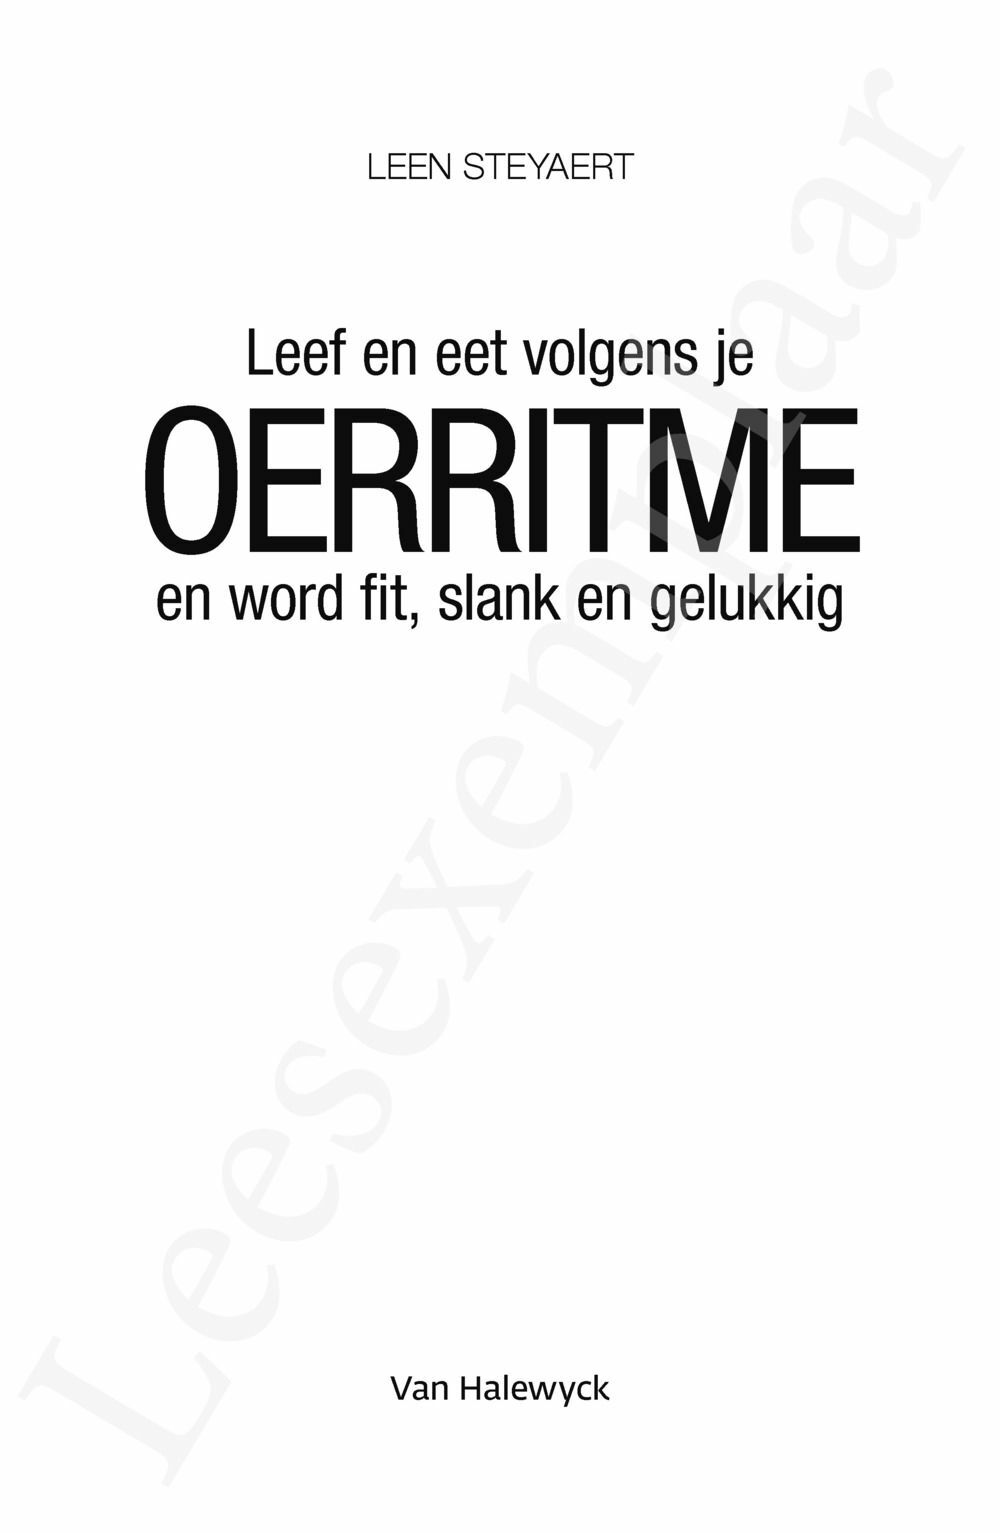 Preview: Oerritme